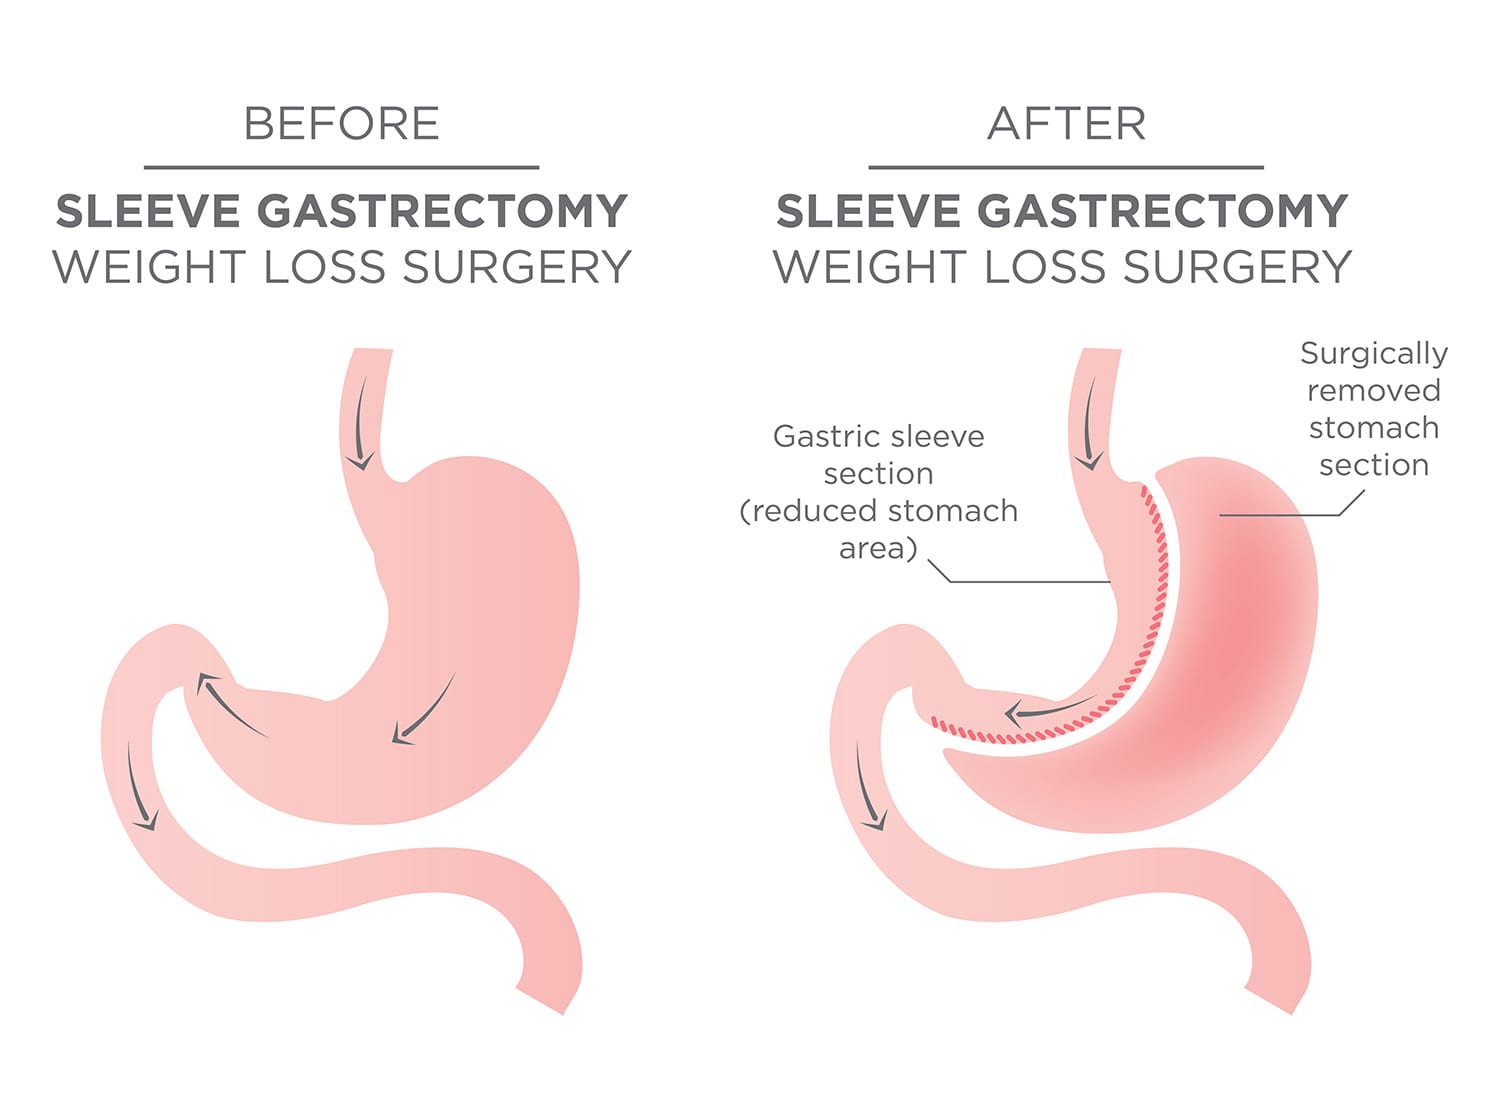 How long does a gastric sleeve last?